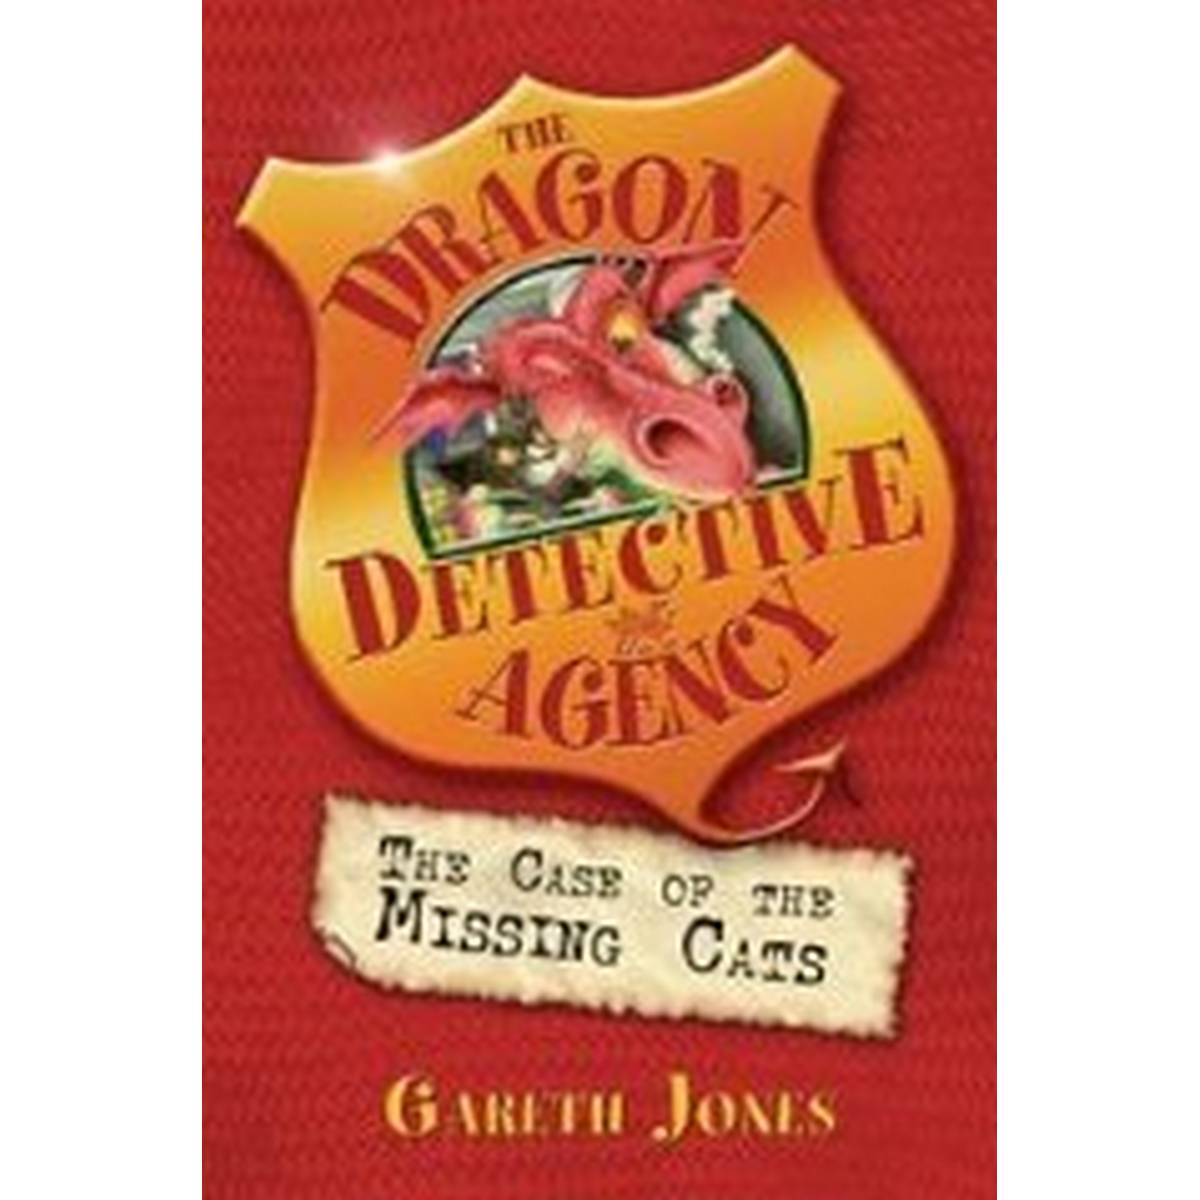 The Case of the Missing Cats (Dragon Detective Agency) 1